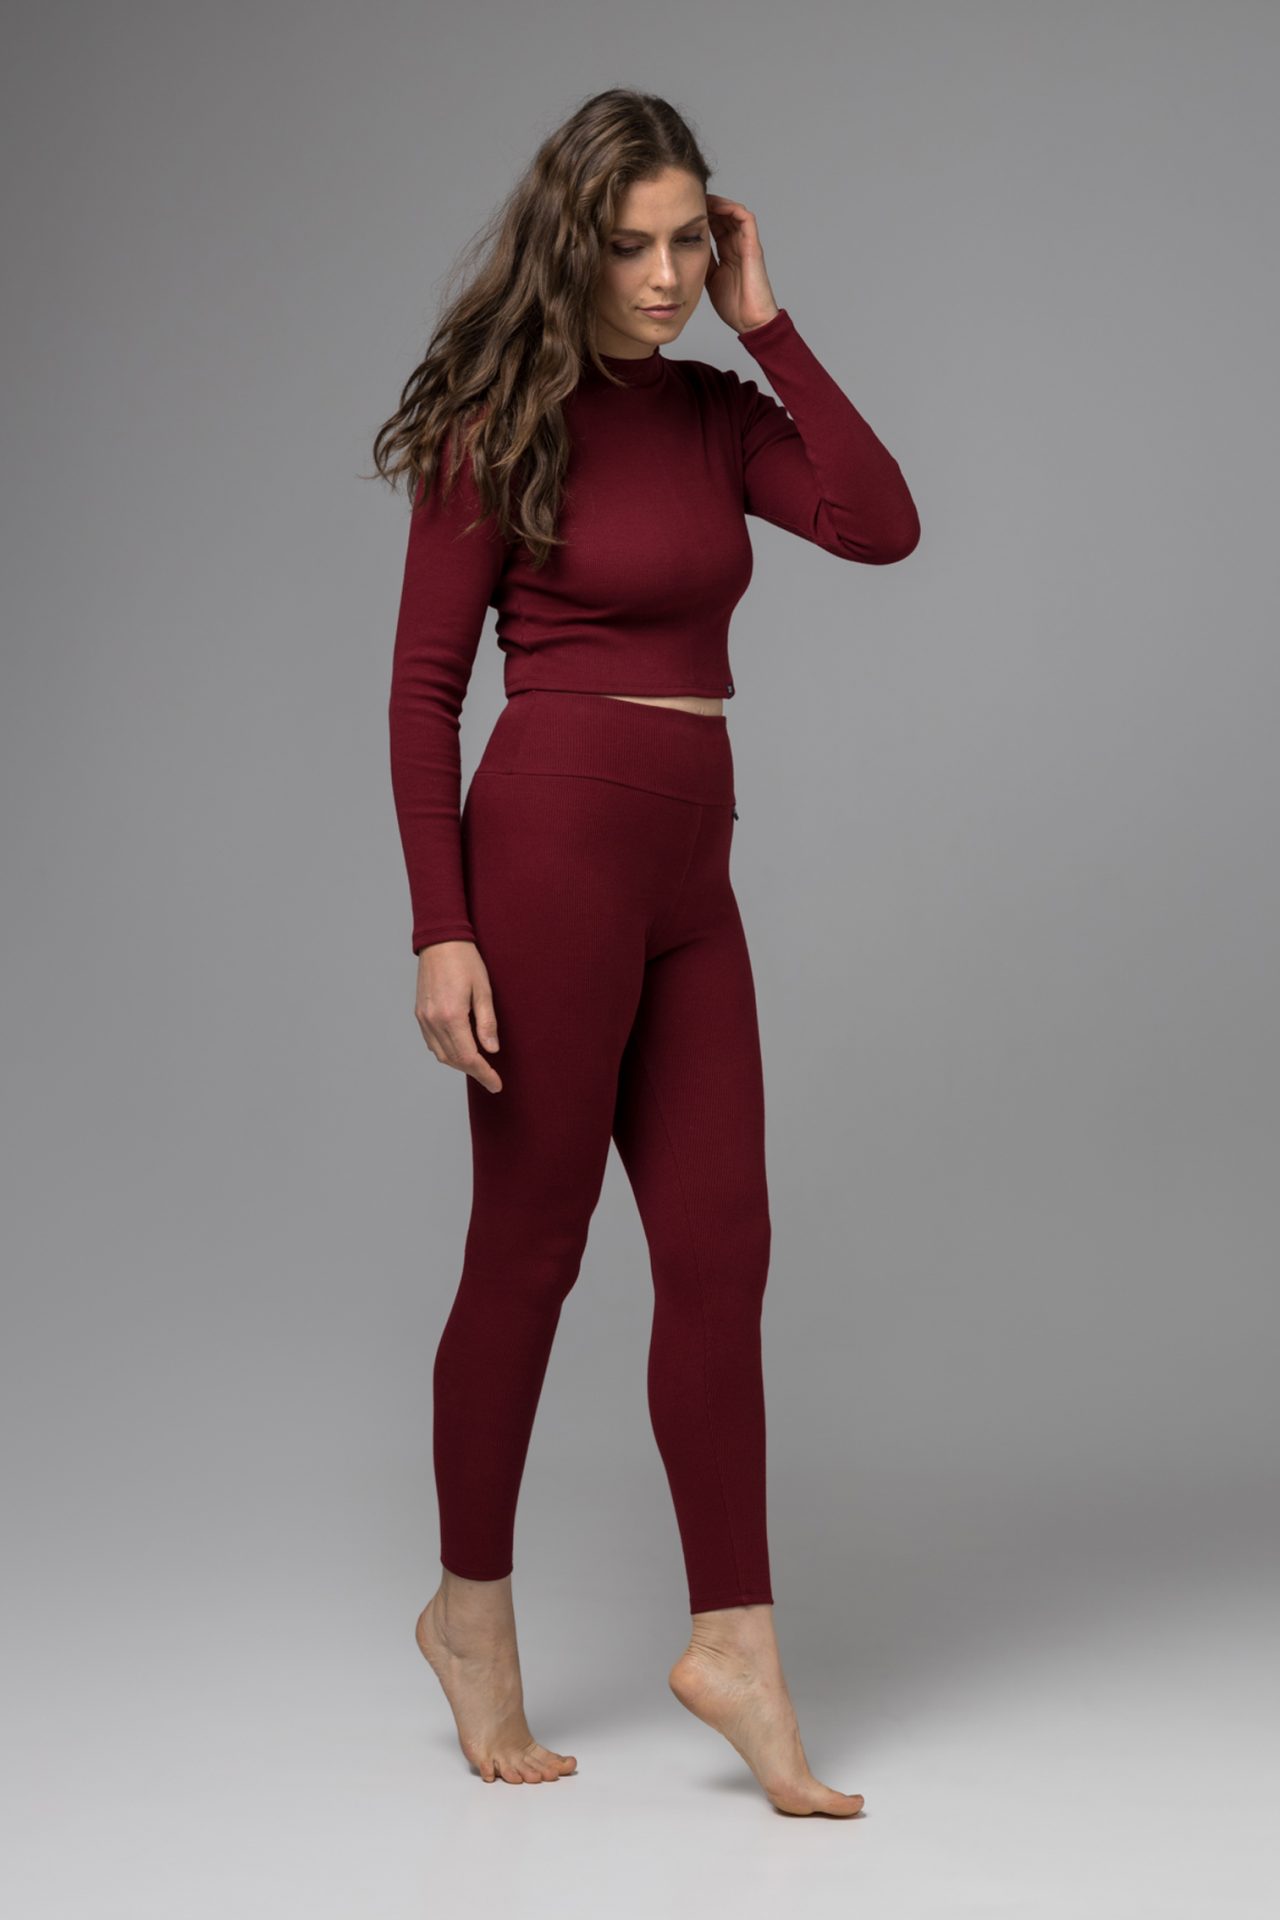 Maroon High Rise Curve Hugging Jeggings for Women -614 - XL / Maroon